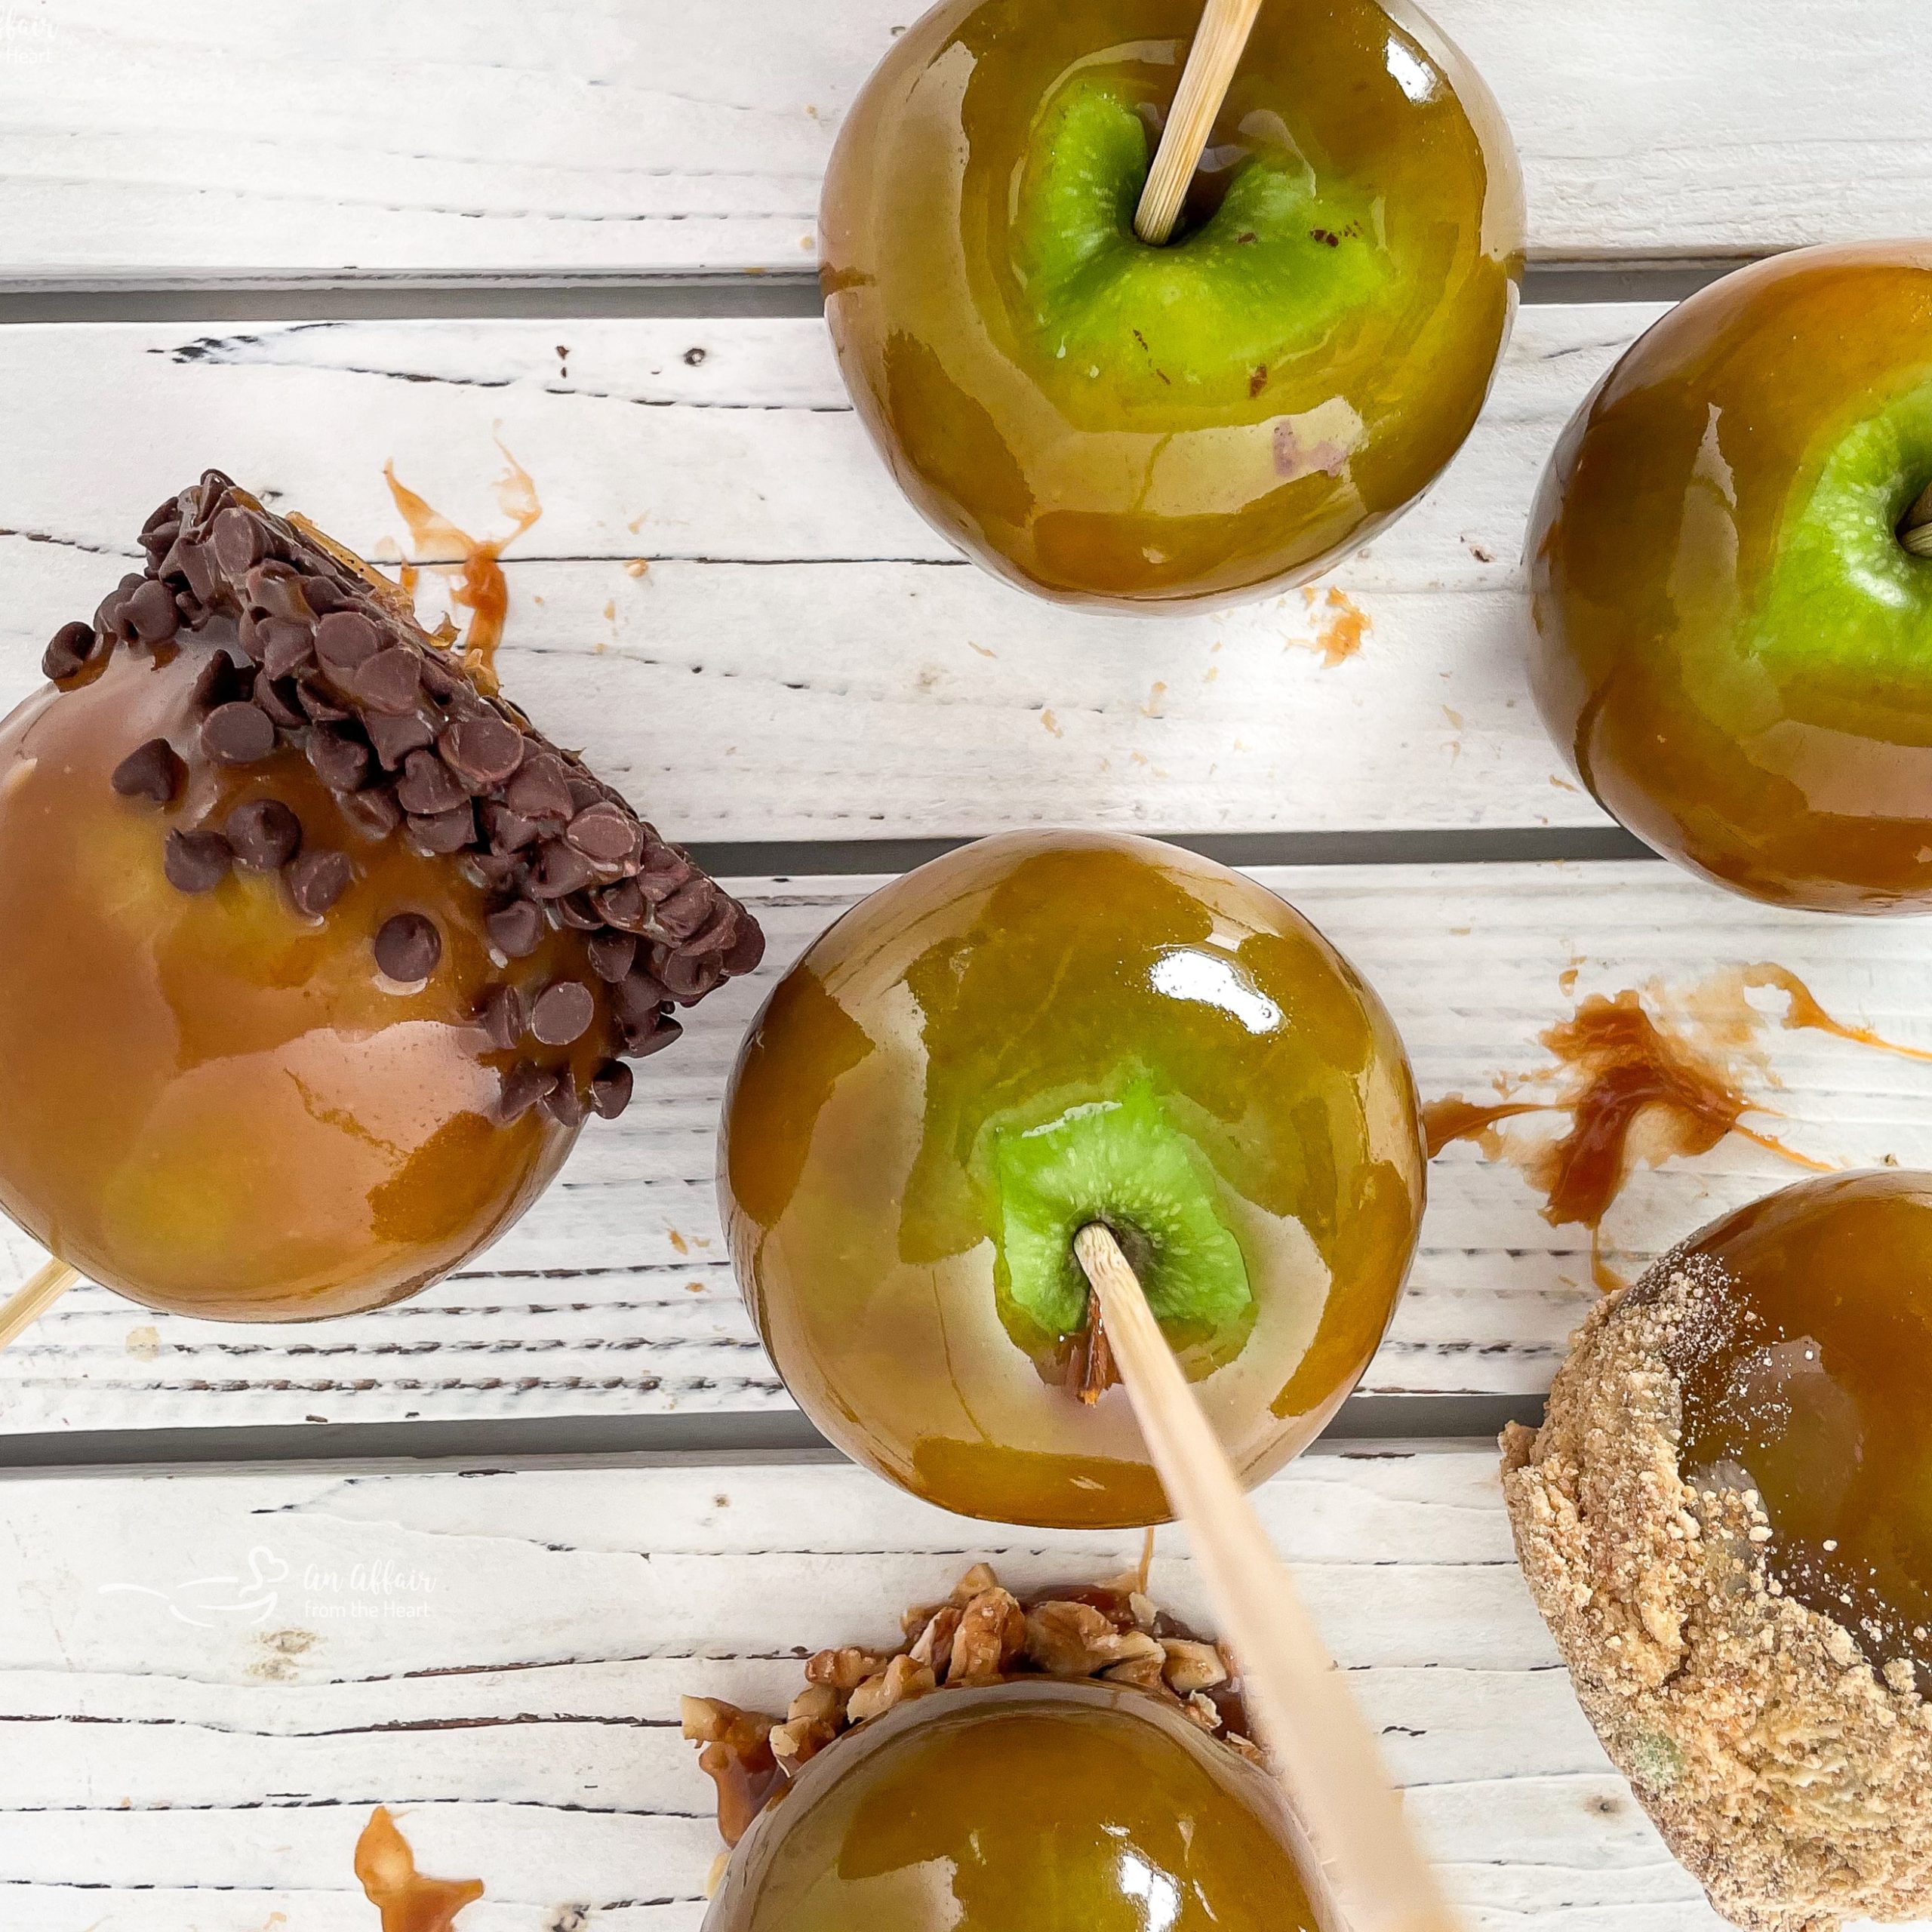 Types of Sticks to Use in Candy Apples  Caramel apples easy, Candy apples,  Candy apple recipe